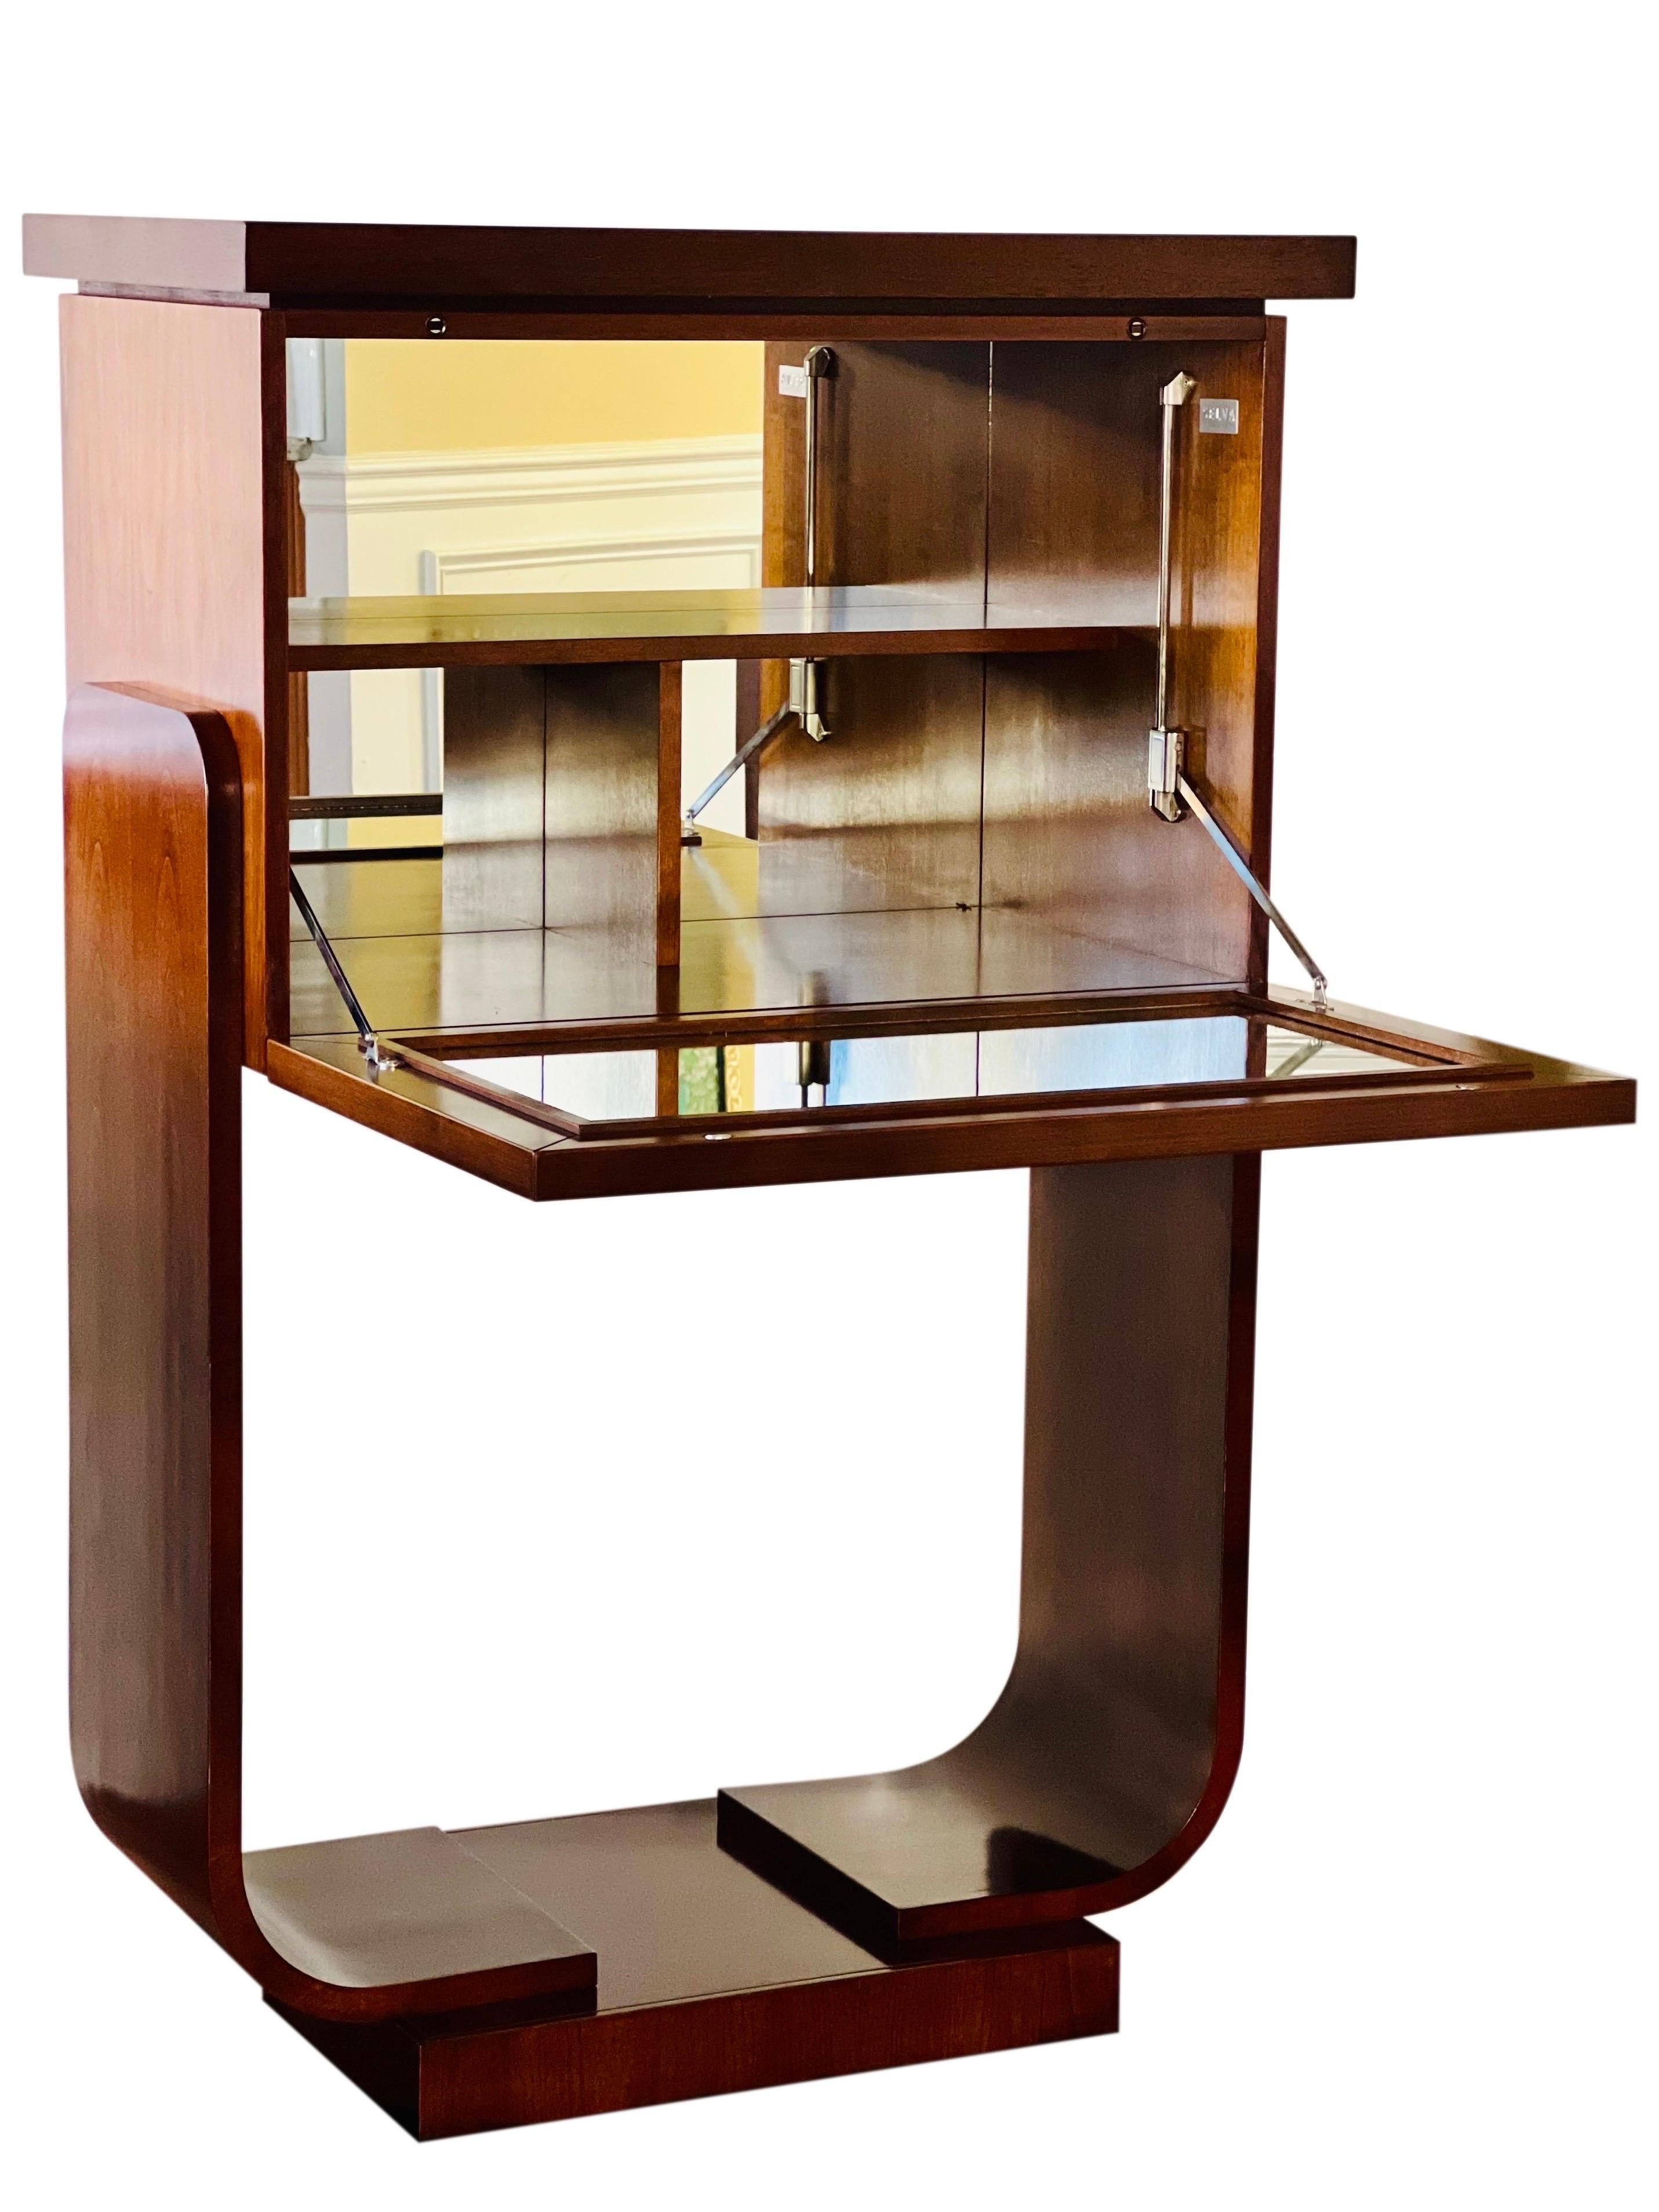 SELVA Italy Art Deco Style Mirrored Bar Cabinet For Sale 1